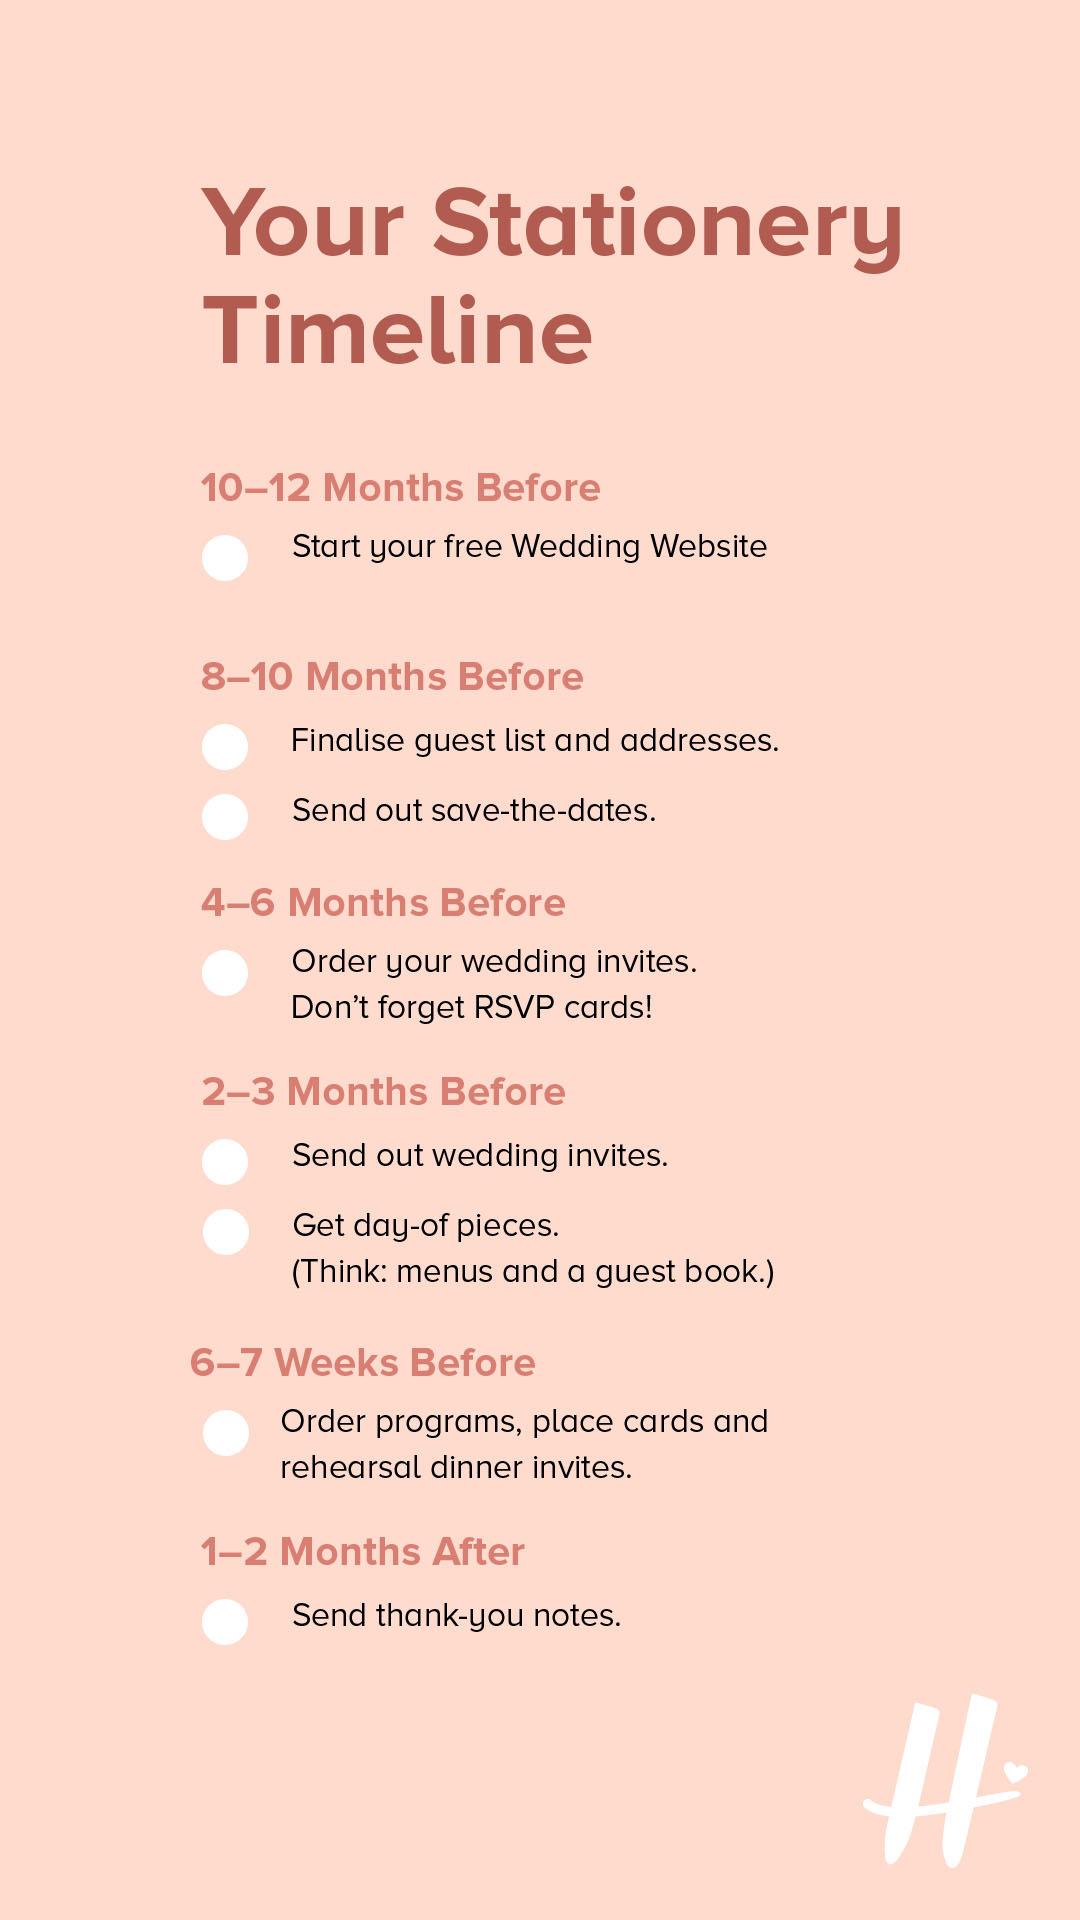 When to Send Save the Dates